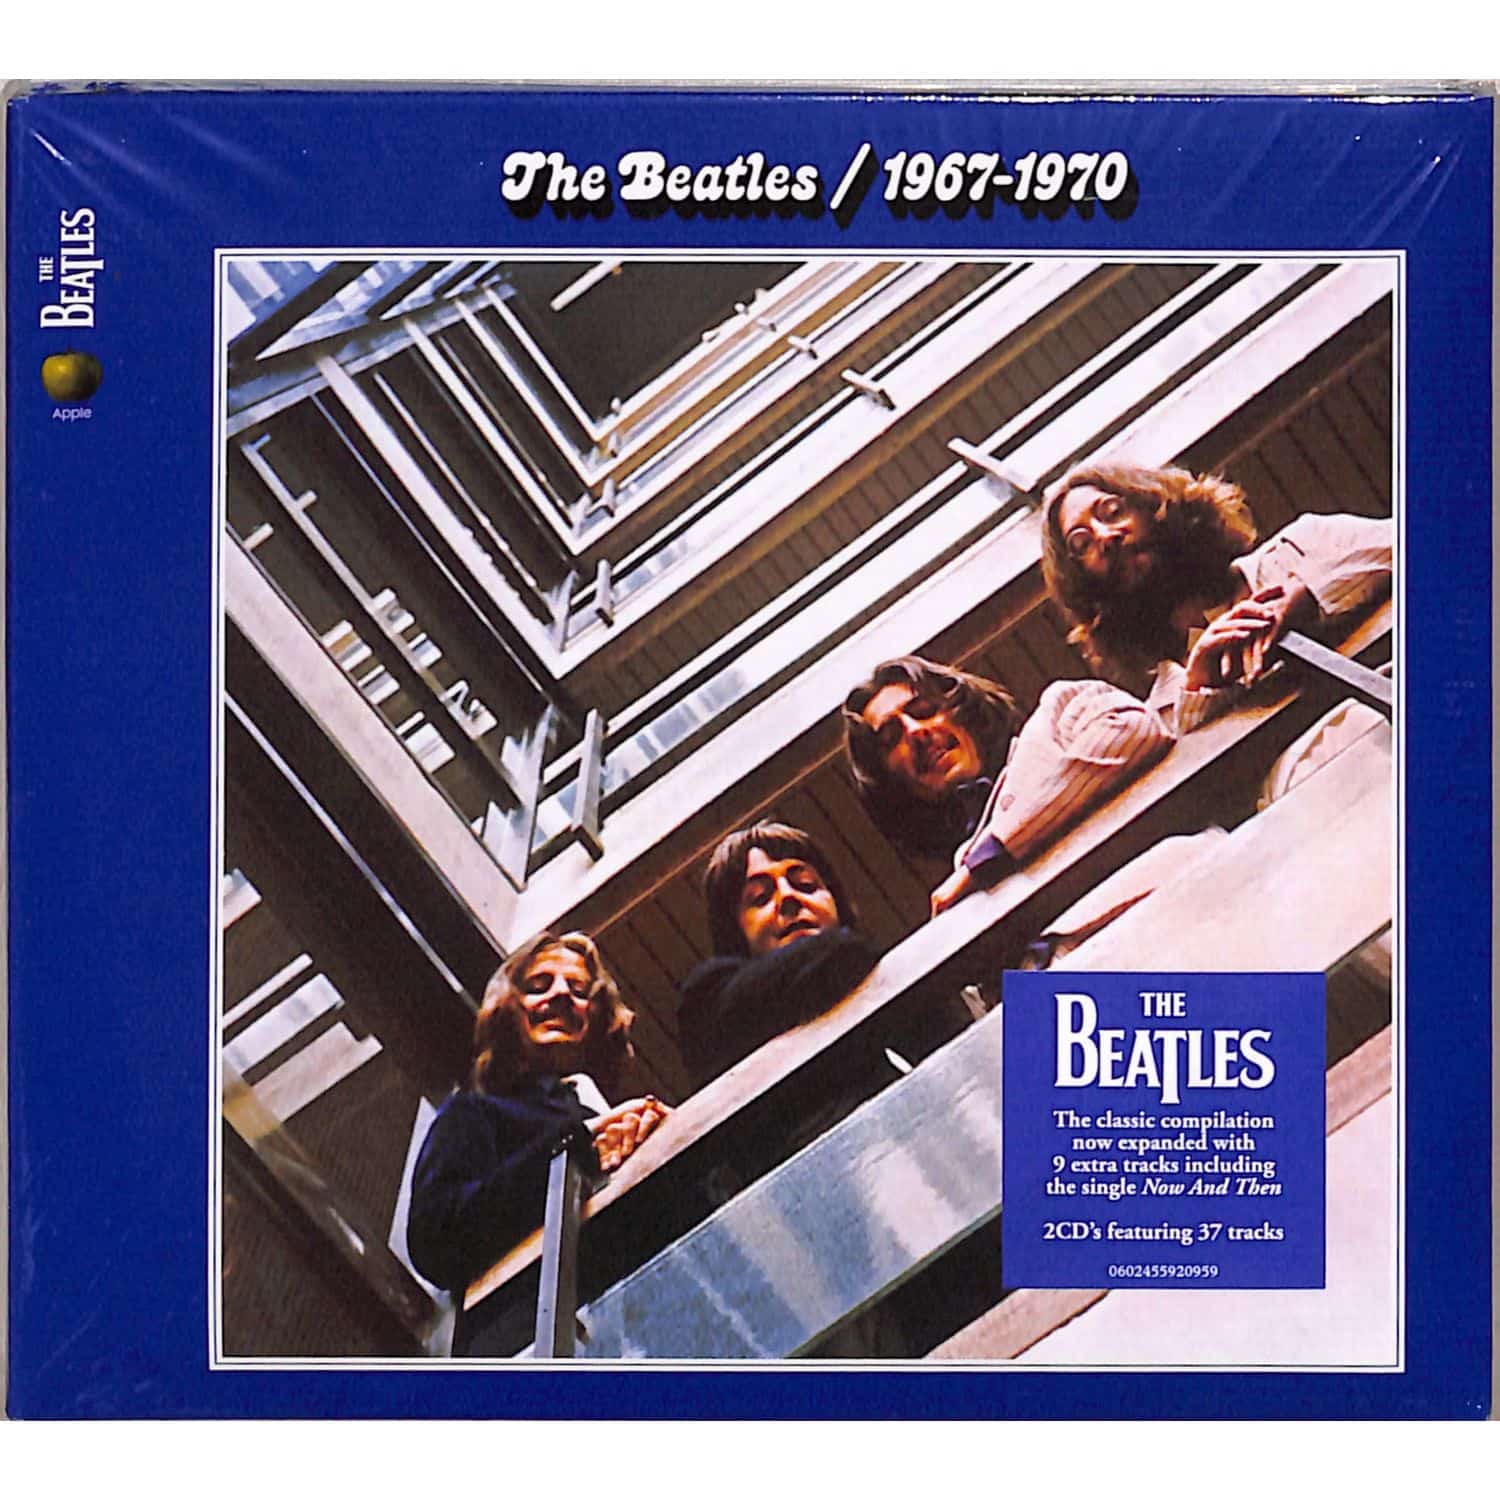 The Beatles - THE BEATLES 1967 - 1970 